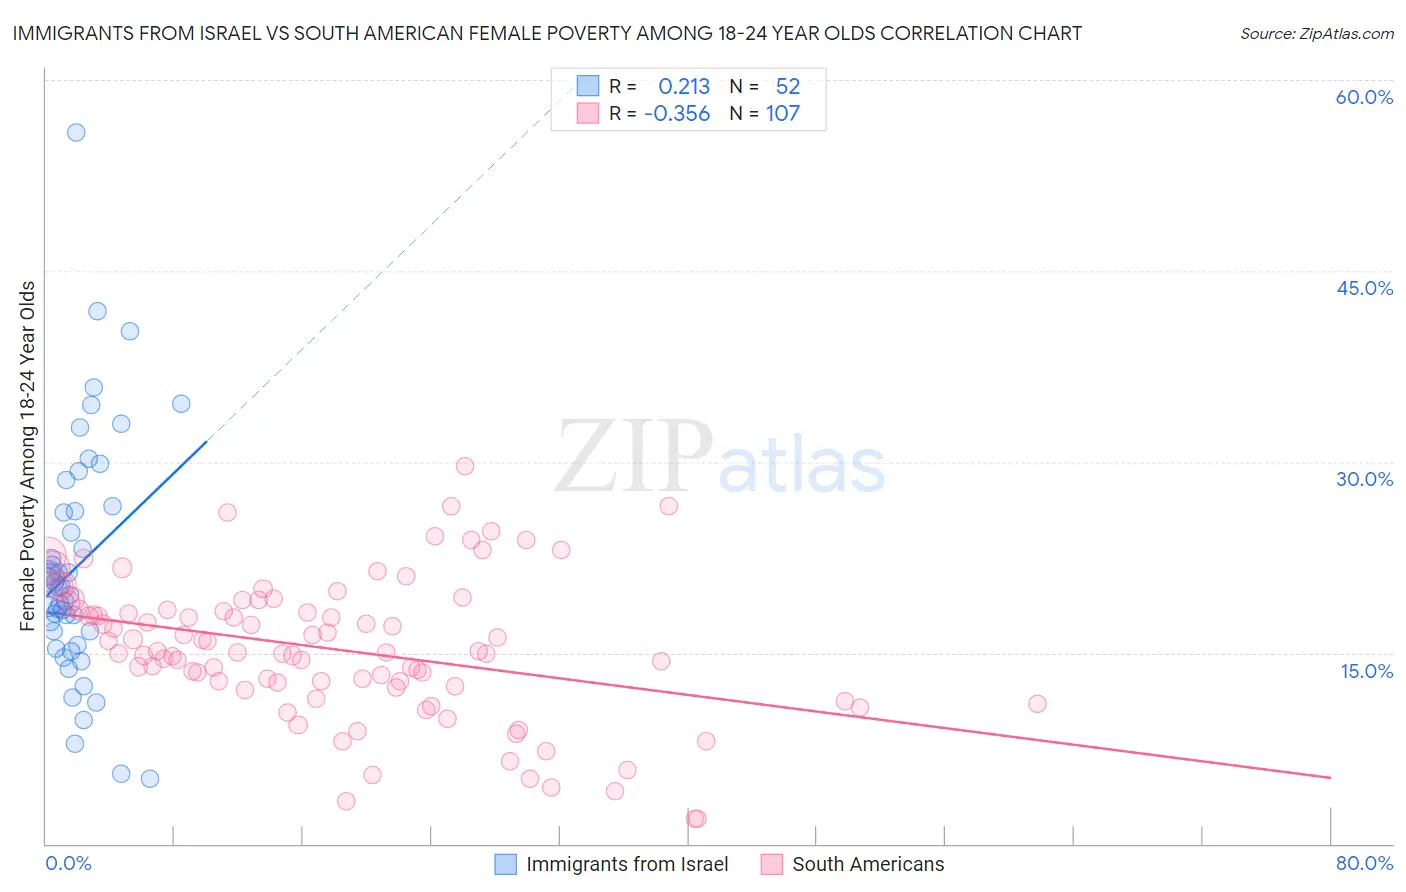 Immigrants from Israel vs South American Female Poverty Among 18-24 Year Olds